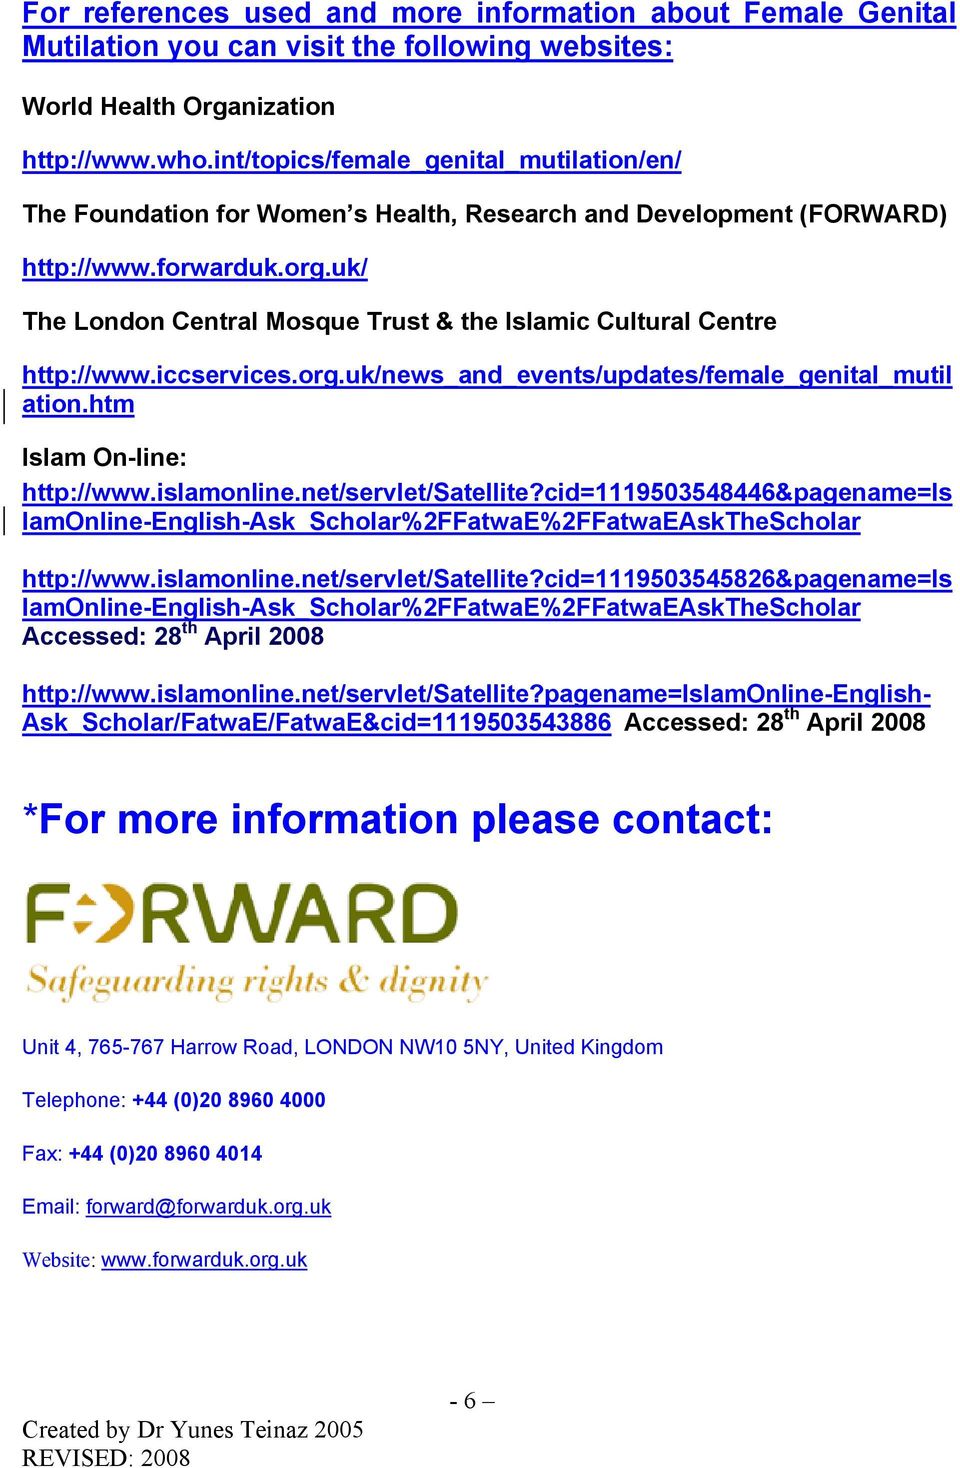 uk/ The London Central Mosque Trust & the Islamic Cultural Centre http://www.iccservices.org.uk/news_and_events/updates/female_genital_mutil ation.htm Islam On-line: http://www.islamonline.